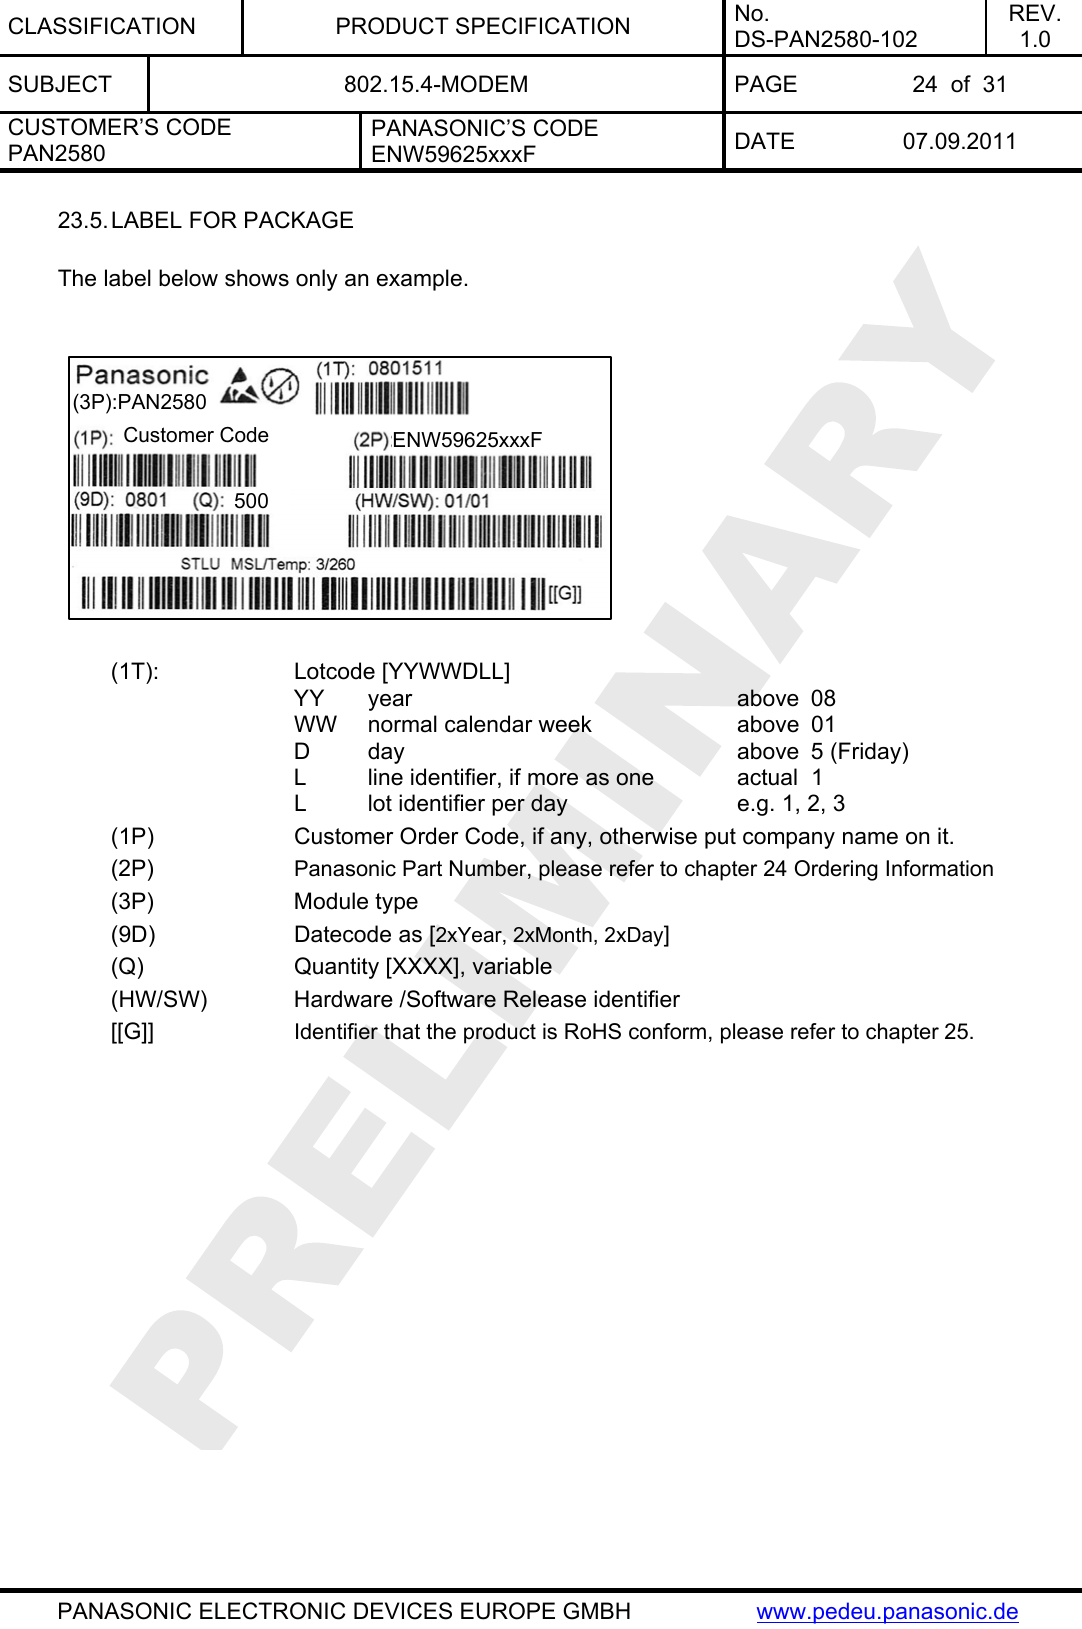 CLASSIFICATION PRODUCT SPECIFICATION No. DS-PAN2580-102 REV. 1.0 SUBJECT  802.15.4-MODEM  PAGE  24  of  31 CUSTOMER’S CODE PAN2580 PANASONIC’S CODE ENW59625xxxF  DATE 07.09.2011   PANASONIC ELECTRONIC DEVICES EUROPE GMBH  www.pedeu.panasonic.de  23.5. LABEL FOR PACKAGE  The label below shows only an example.  ENW59625xxxF 500 (3P):PAN2580 Customer Code  (1T):    Lotcode [YYWWDLL]     YY year     above 08       WW  normal calendar week    above  01    D day     above 5 (Friday)       L  line identifier, if more as one    actual  1       L  lot identifier per day      e.g. 1, 2, 3 (1P)    Customer Order Code, if any, otherwise put company name on it. (2P)   Panasonic Part Number, please refer to chapter 24 Ordering Information (3P)   Module type (9D)    Datecode as [2xYear, 2xMonth, 2xDay] (Q)     Quantity [XXXX], variable (HW/SW)    Hardware /Software Release identifier [[G]]   Identifier that the product is RoHS conform, please refer to chapter 25.   